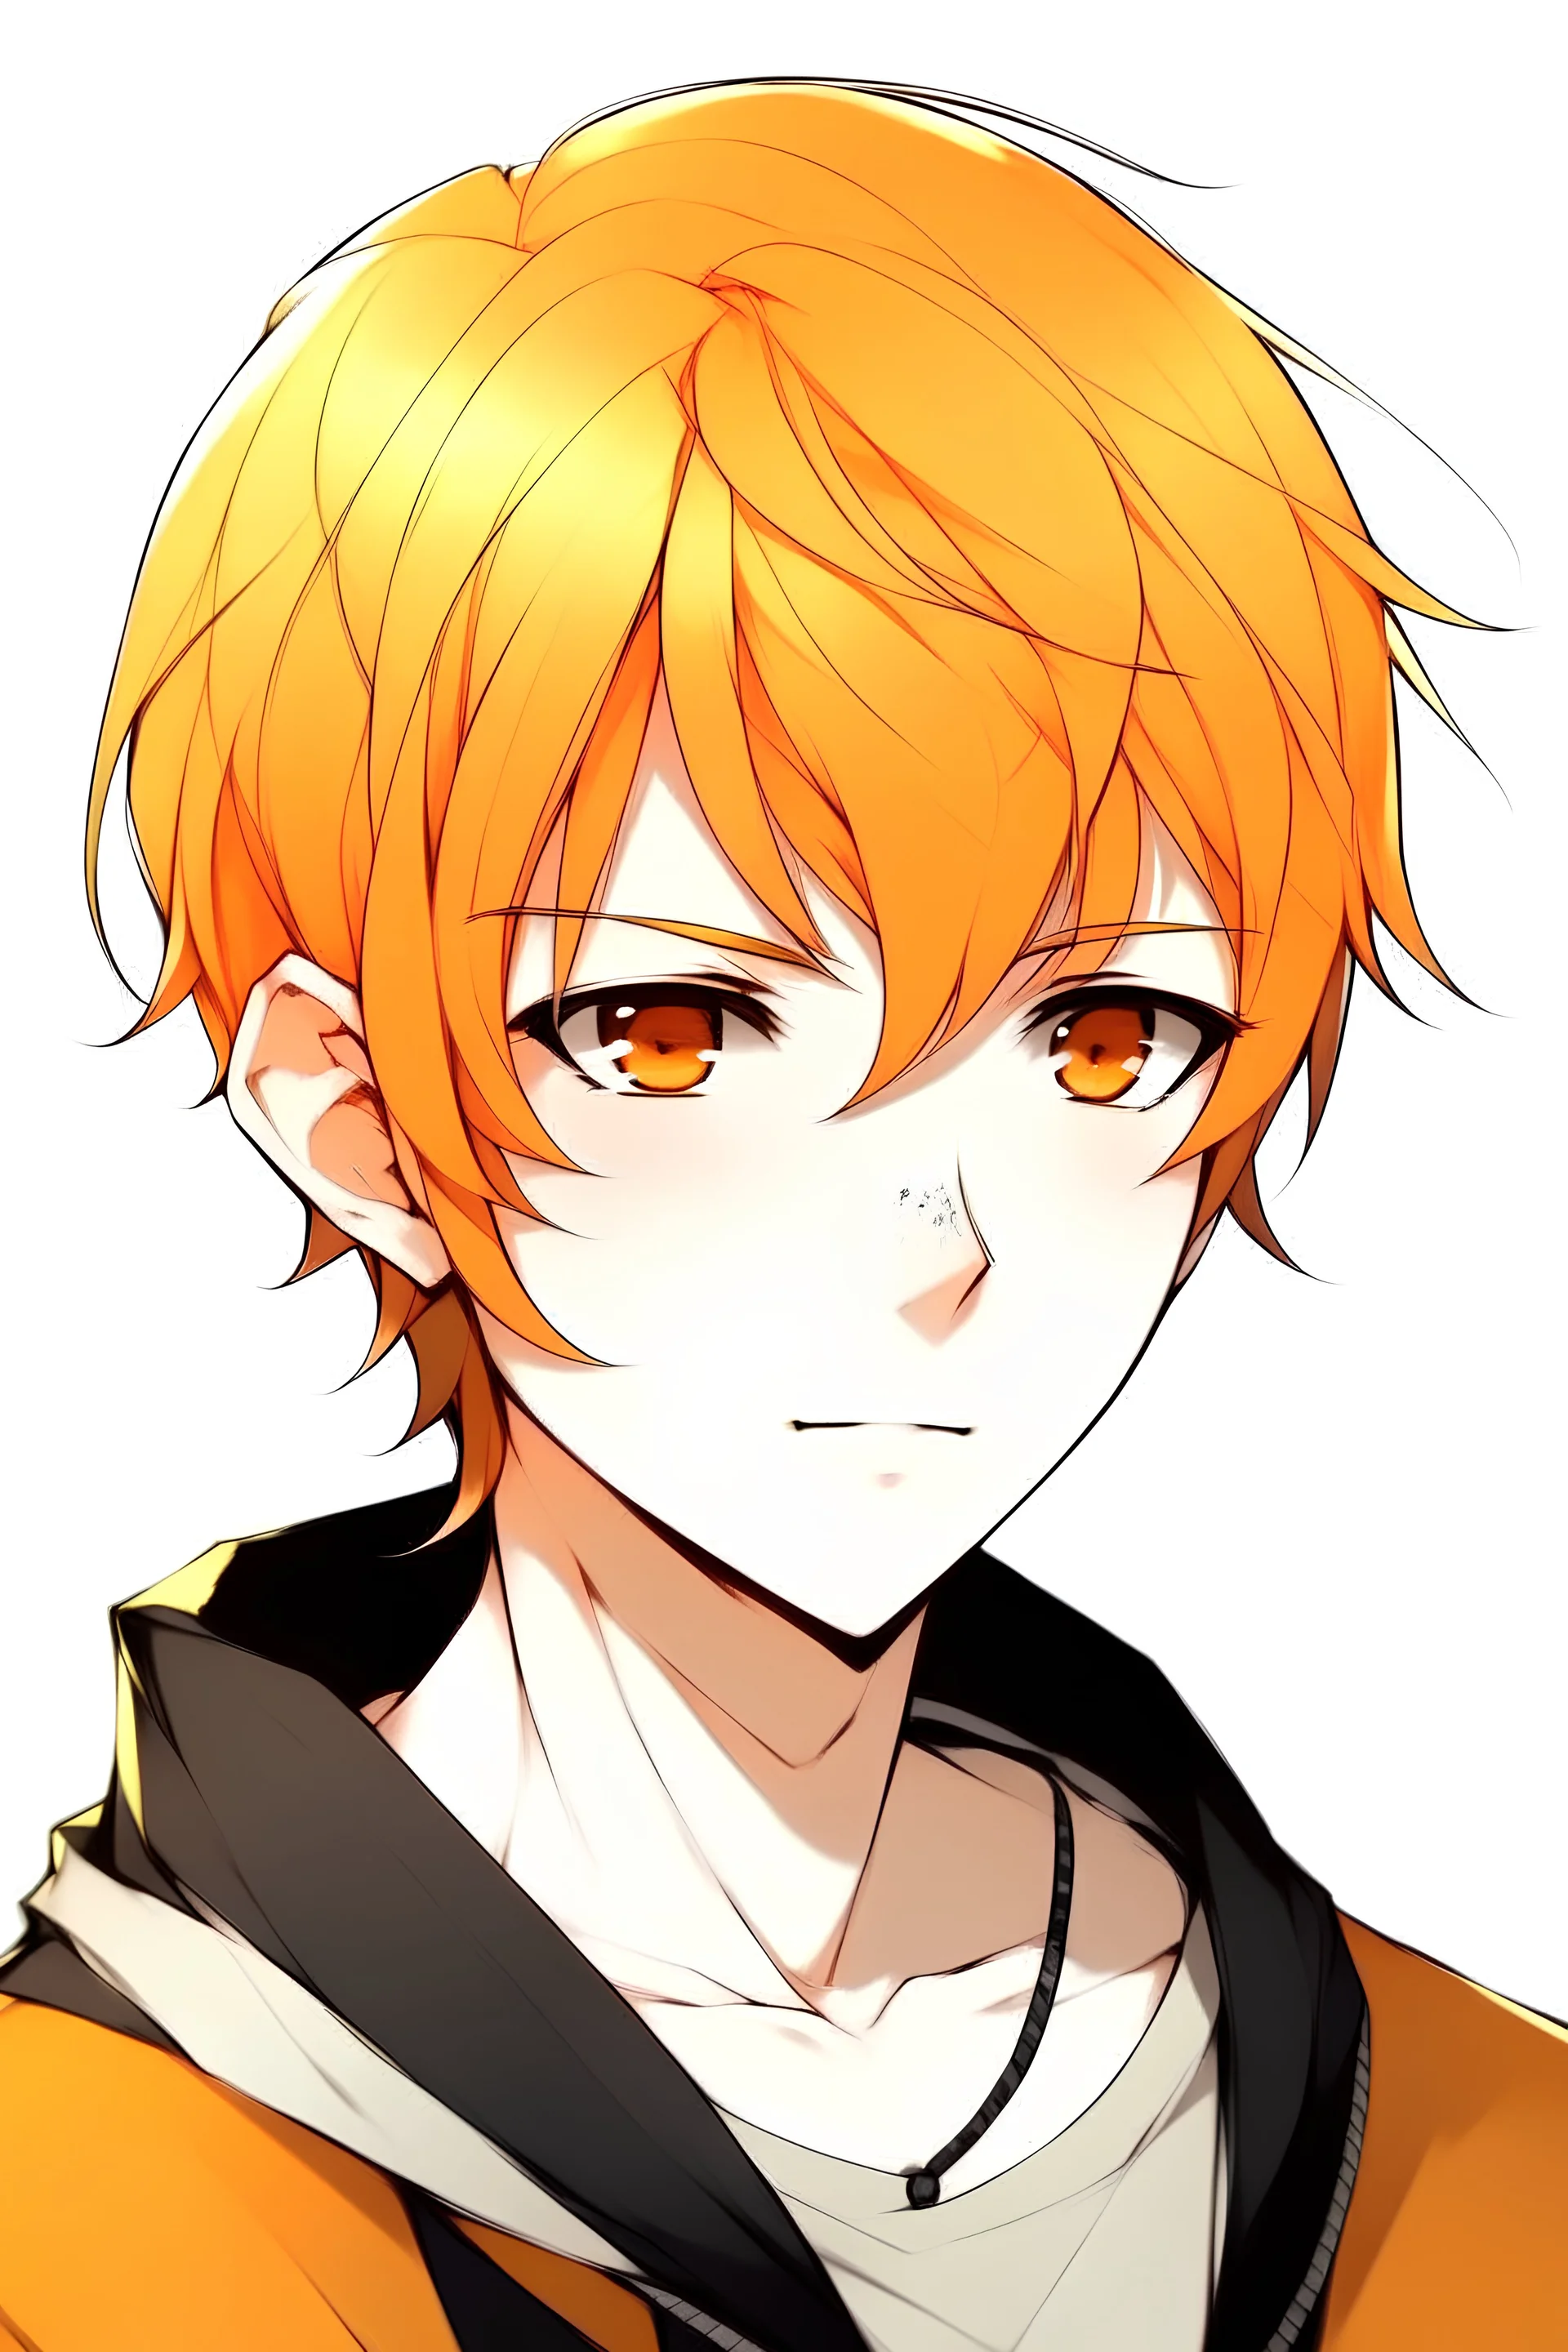 Anime boy with neck length bright orange hair, with black eyes and slightly narrow eyes, with pale skin